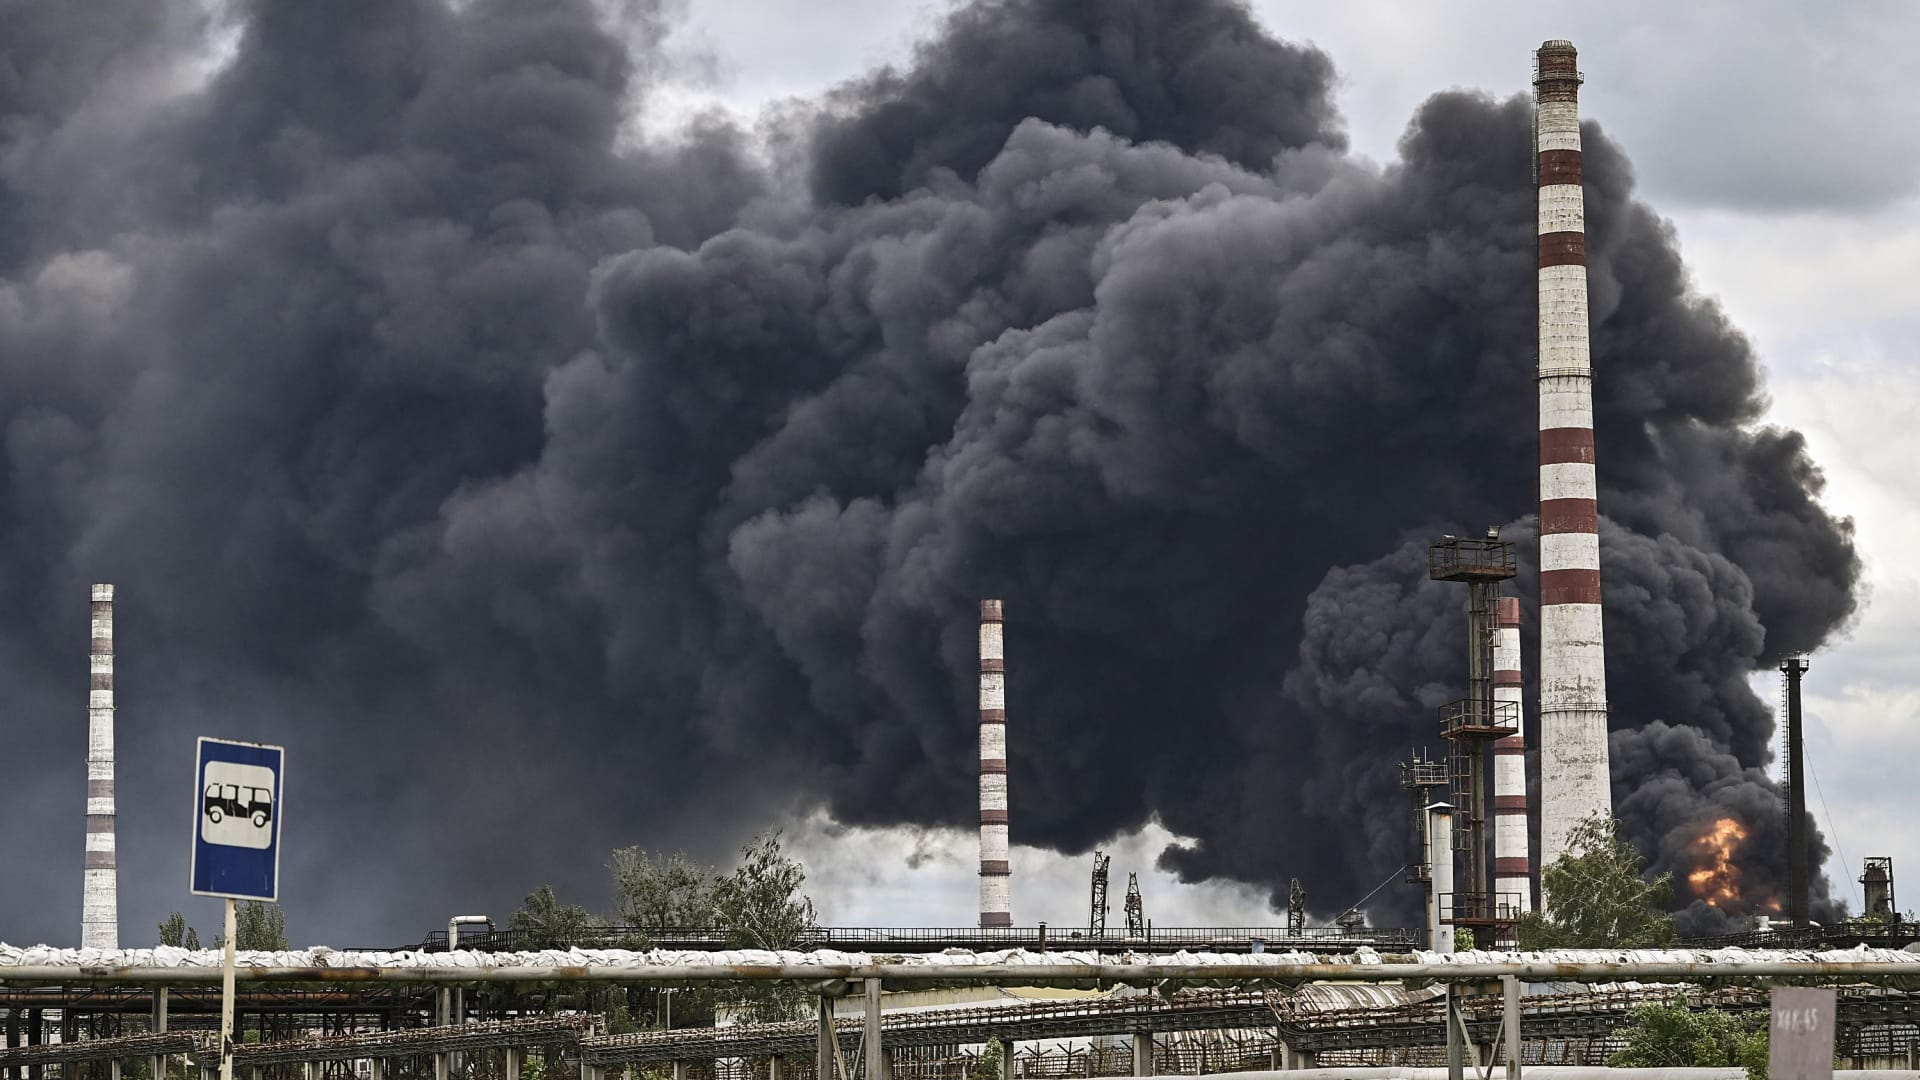 TOPSHOT - Smoke rises from an oil refinery after an attack outside the city of Lysychansk in the eastern Ukranian region of Donbas, on May 22, 2022, on the 88th day of the Russian invasion of Ukraine.